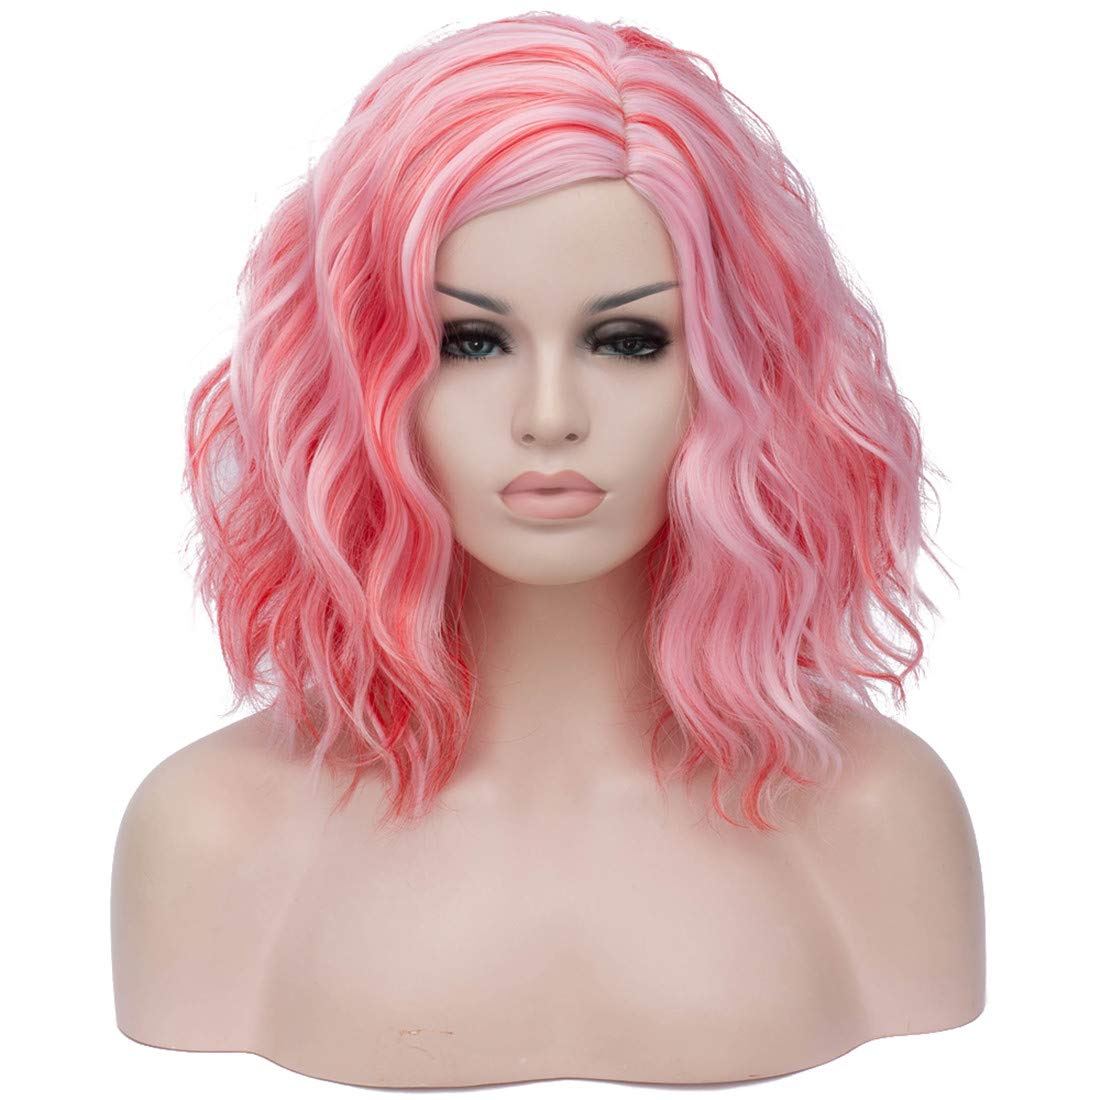 pink HAIR Synthetic Curly Bob Wig with Bangs Short Bob Wavy Hair Wigs Wine Red Color Wigs for Women Bob Style Synthetic Heat Resistant Bob Wigs.